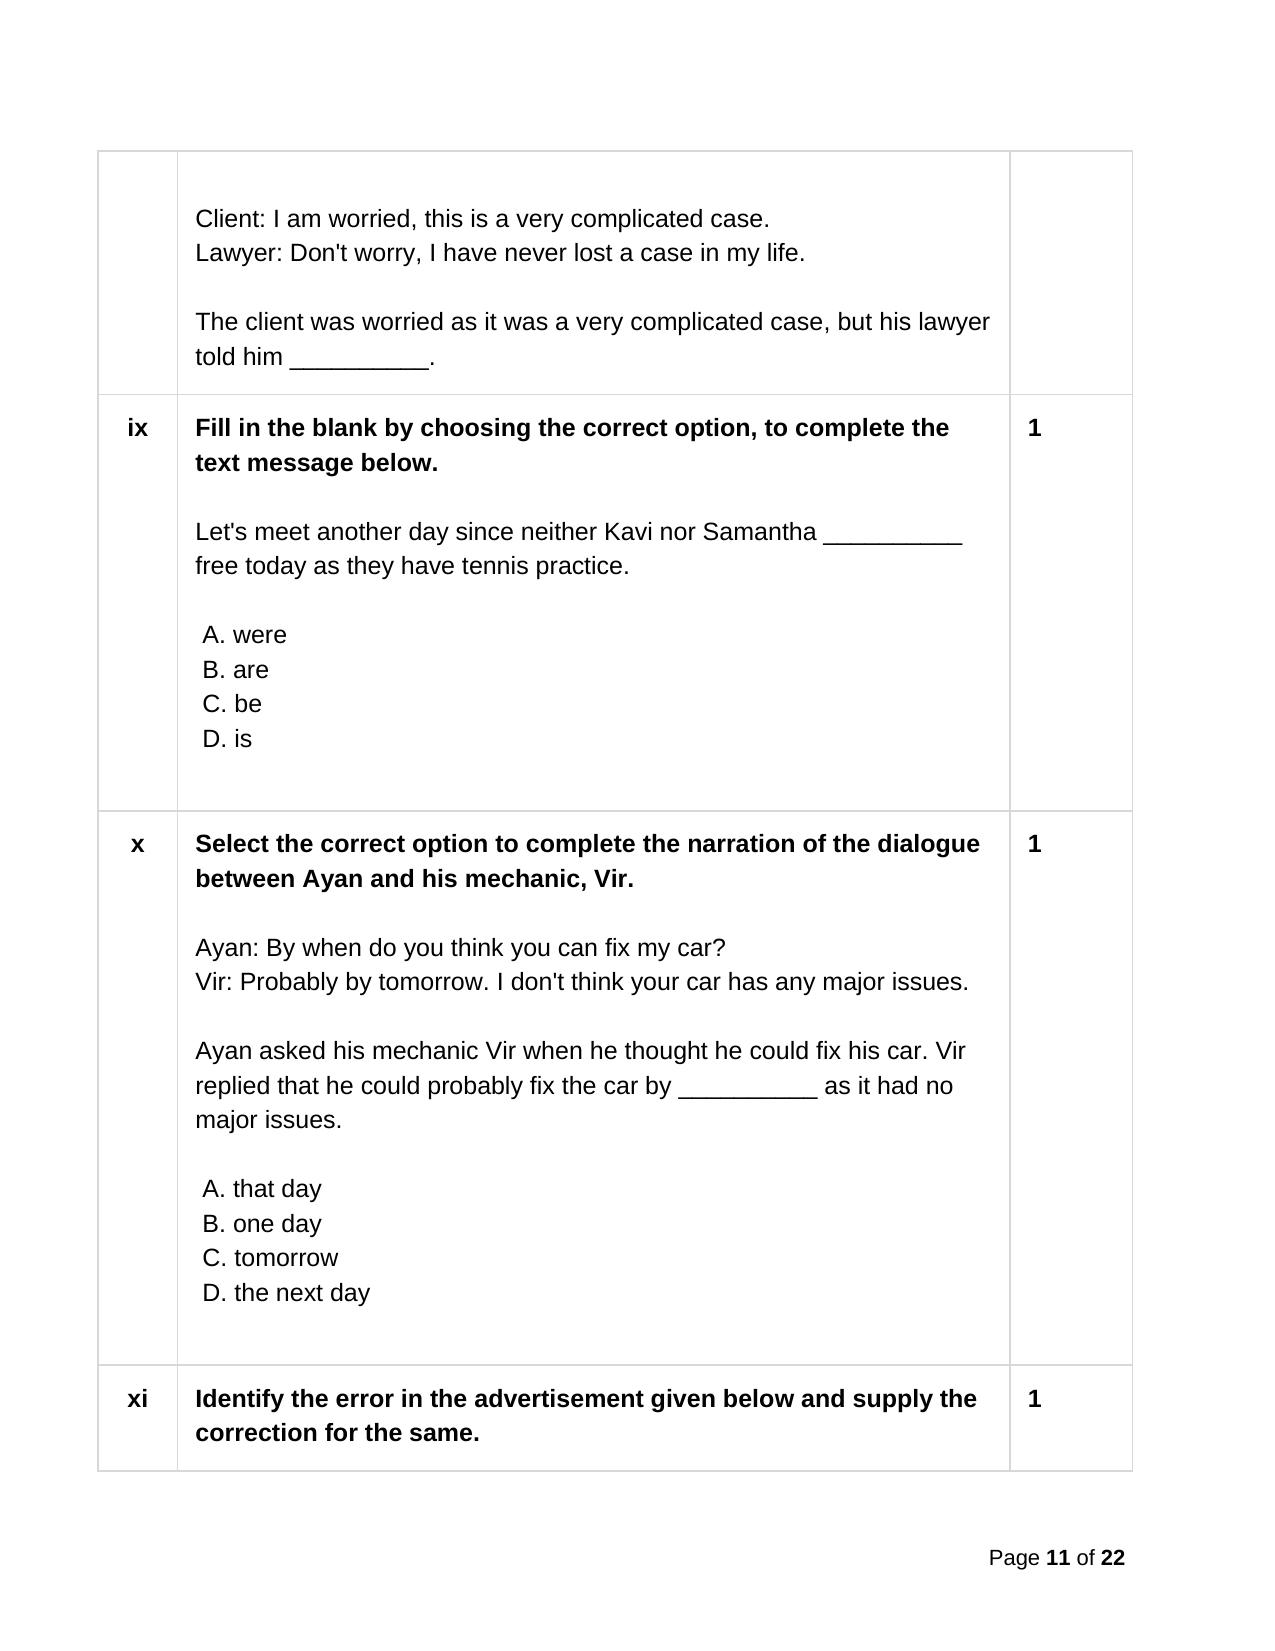 CBSE Class 10 English Practice Questions 2022-23 - Page 11